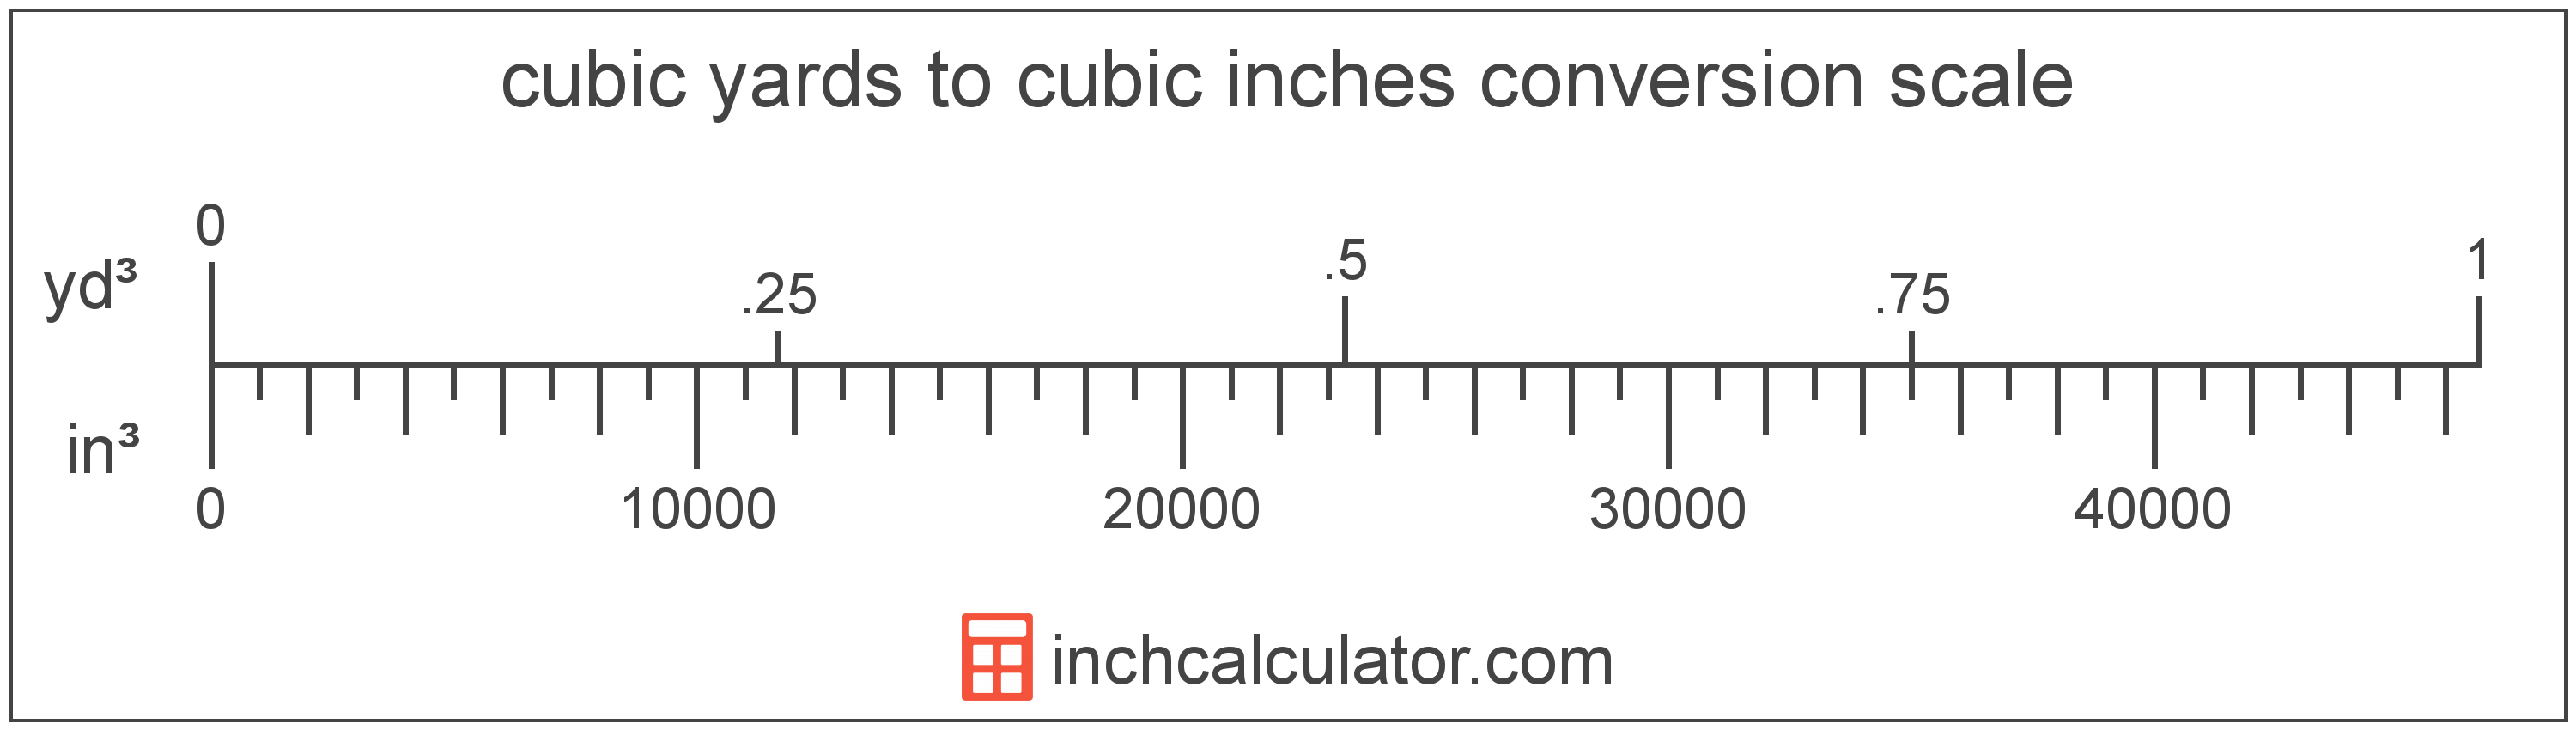 conversion scale showing cubic yards and equivalent cubic inches volume values